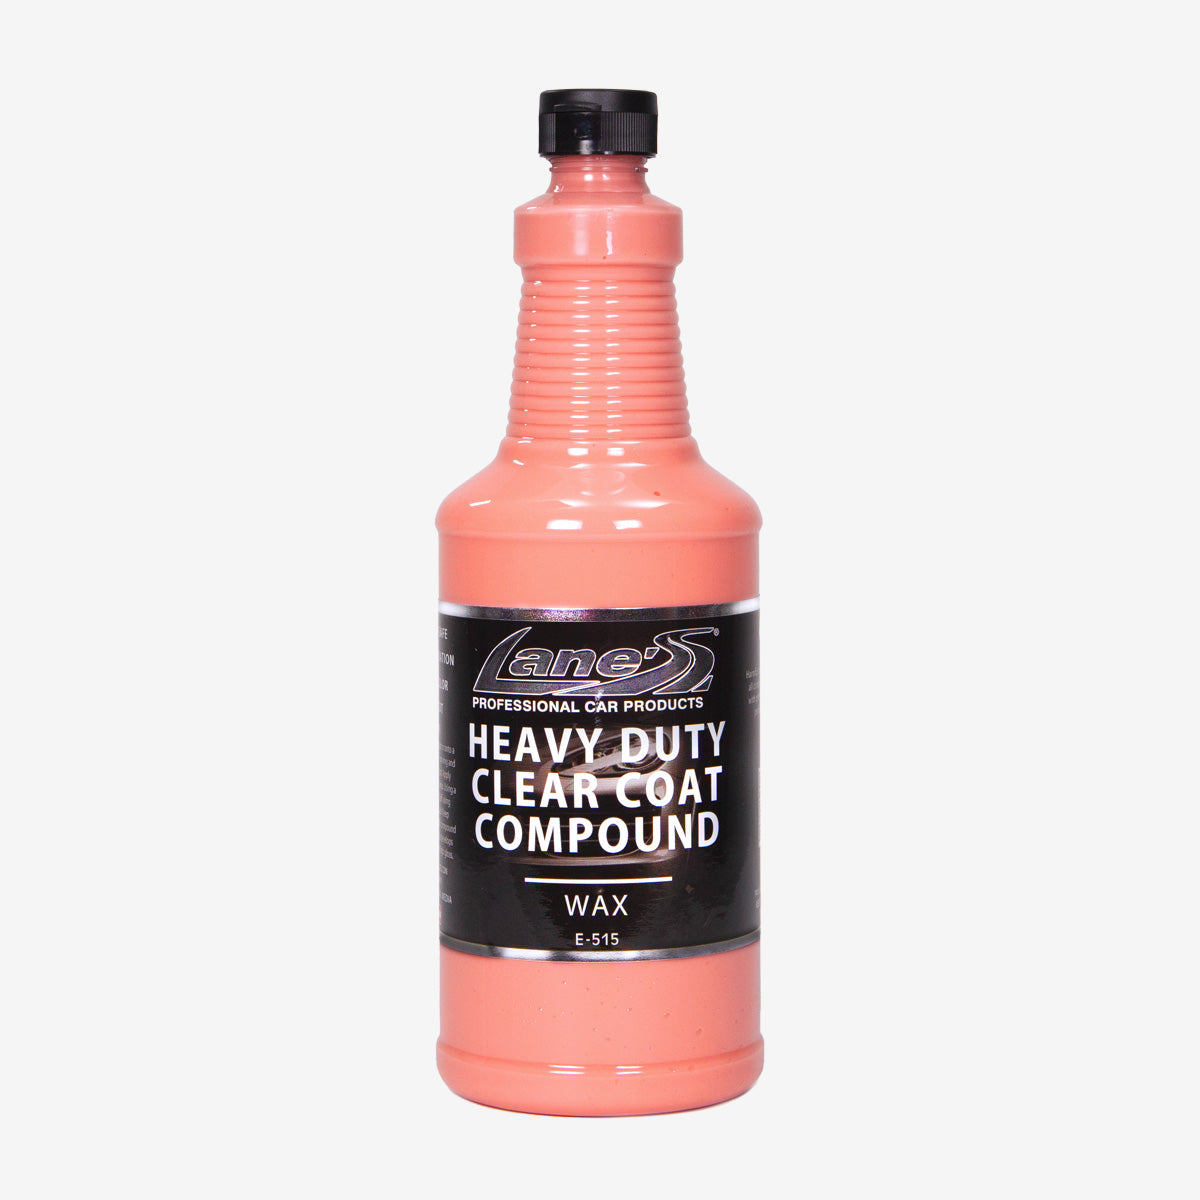 Heavy Duty Clear Coat Compound